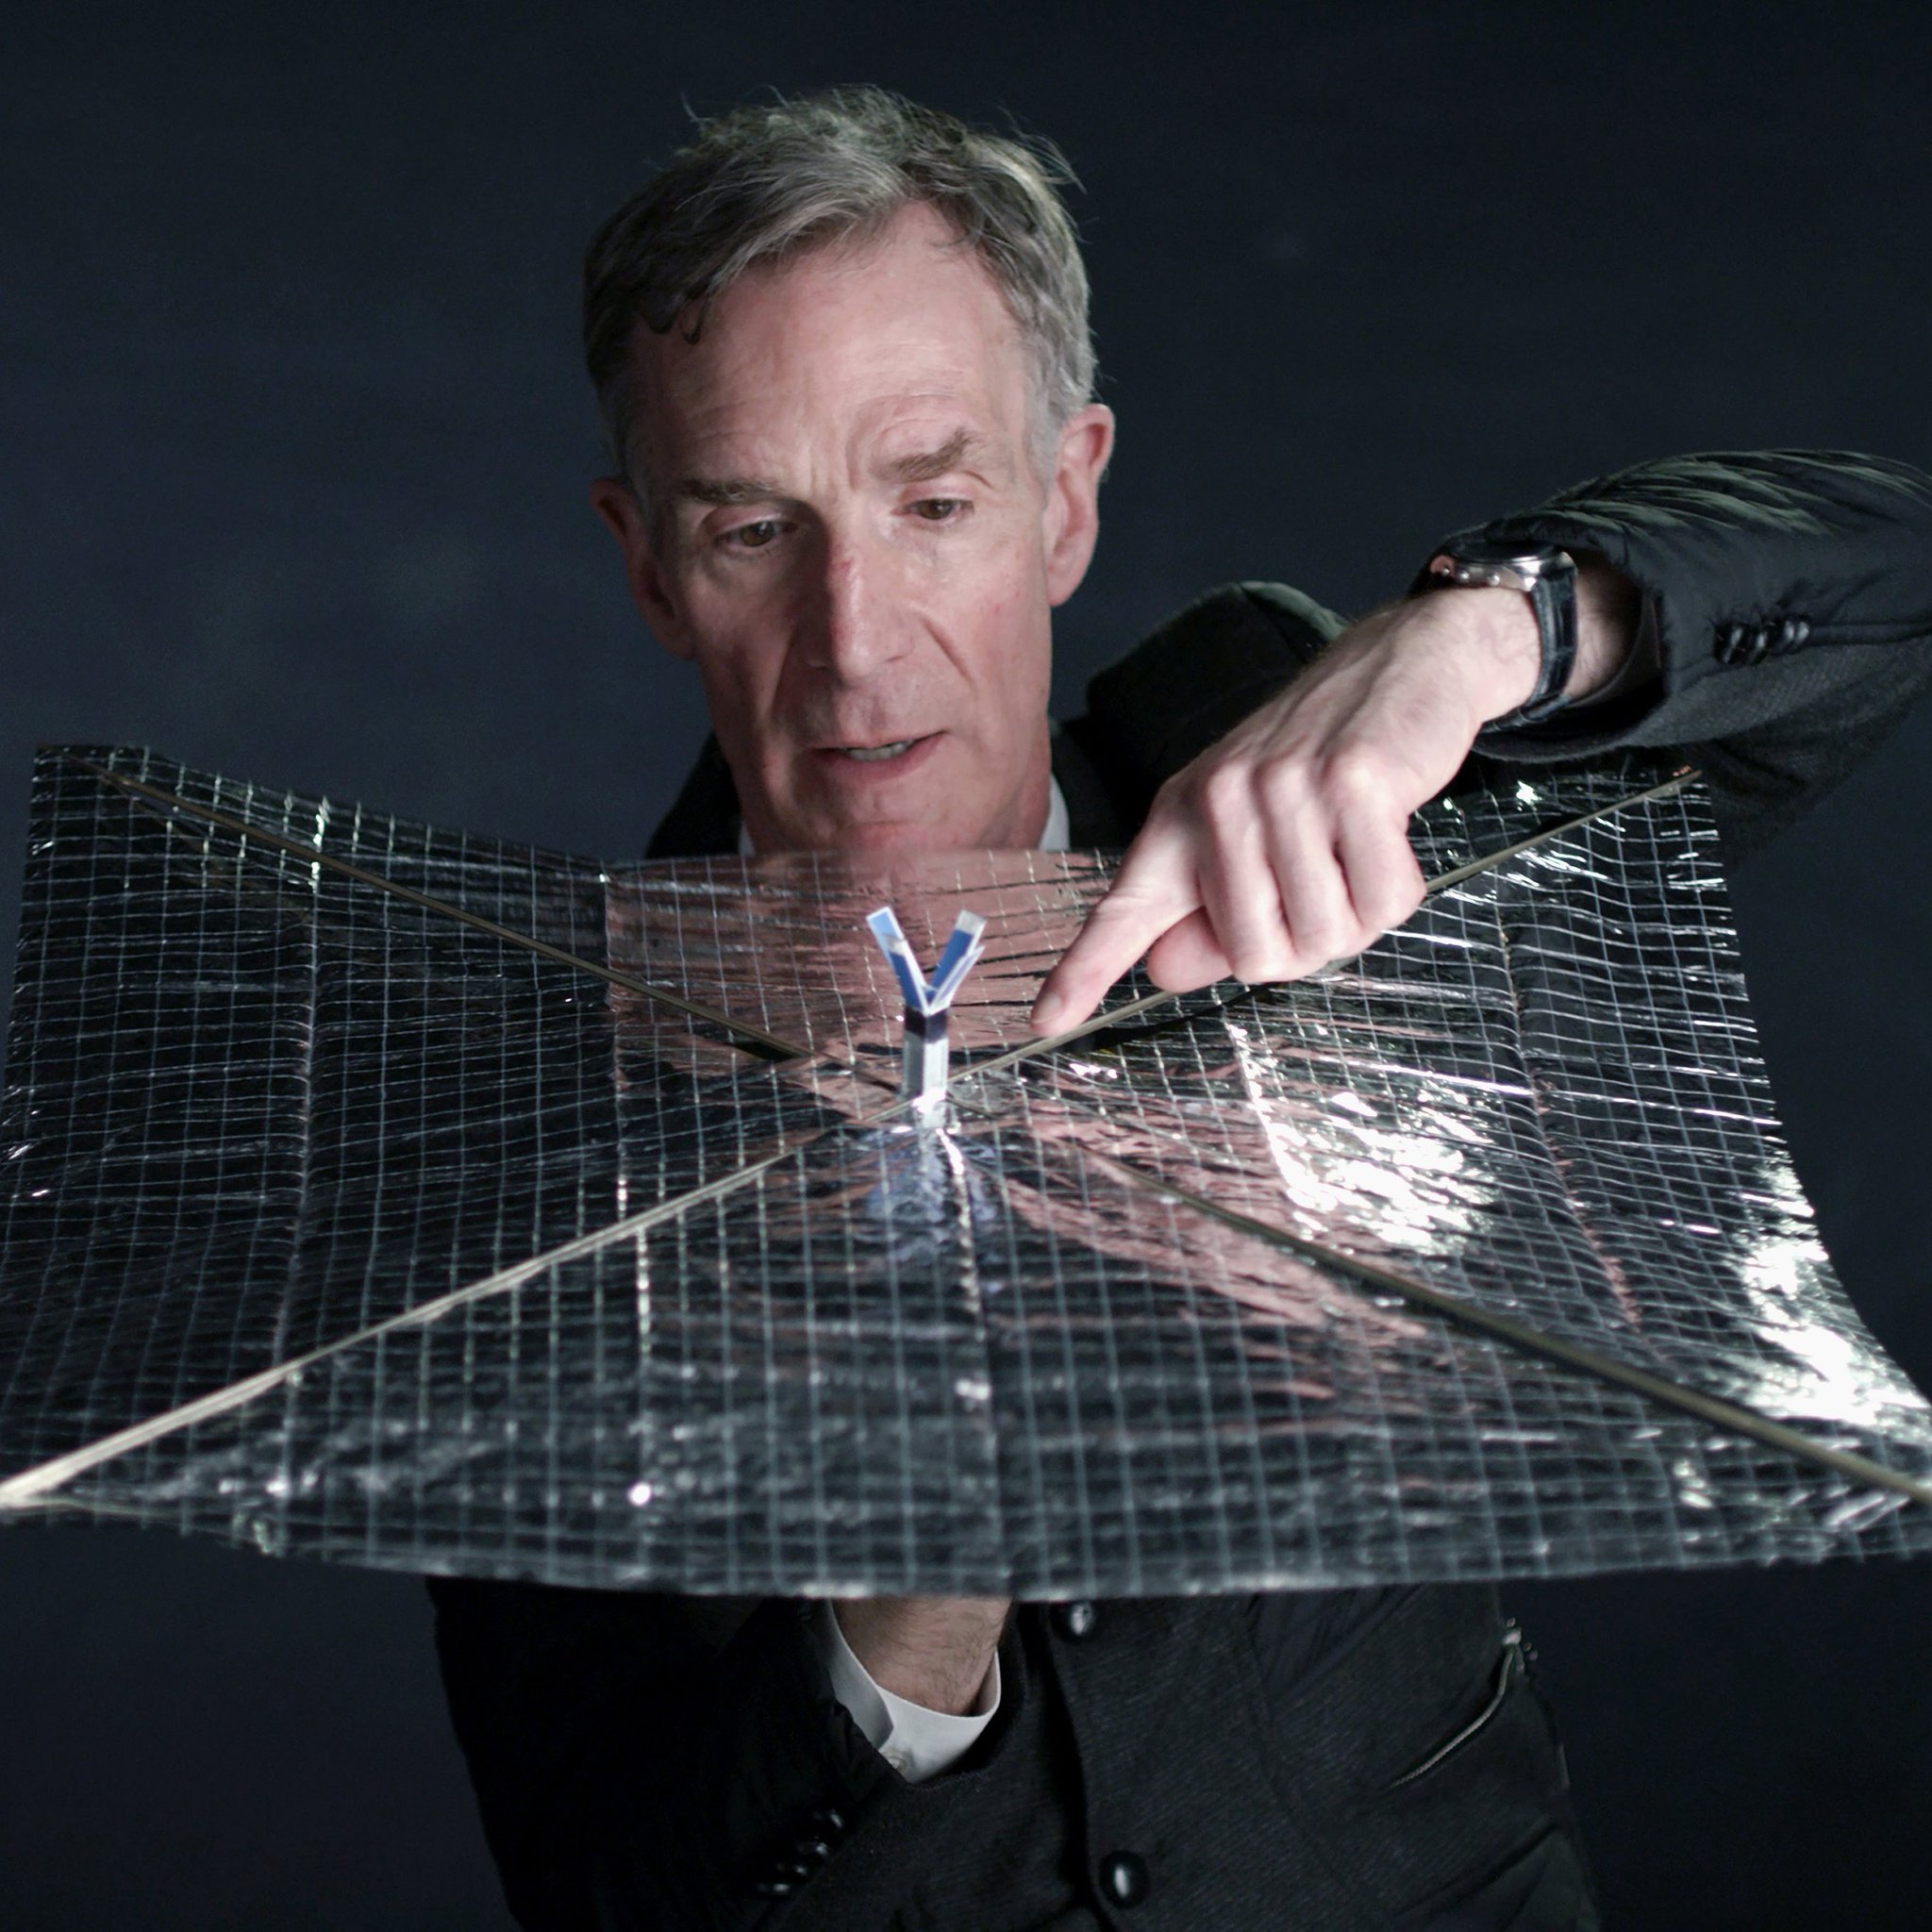 A very happy birthday to Bill Nye the Science Guy! Thank you for keeping us curious about the world around us.  